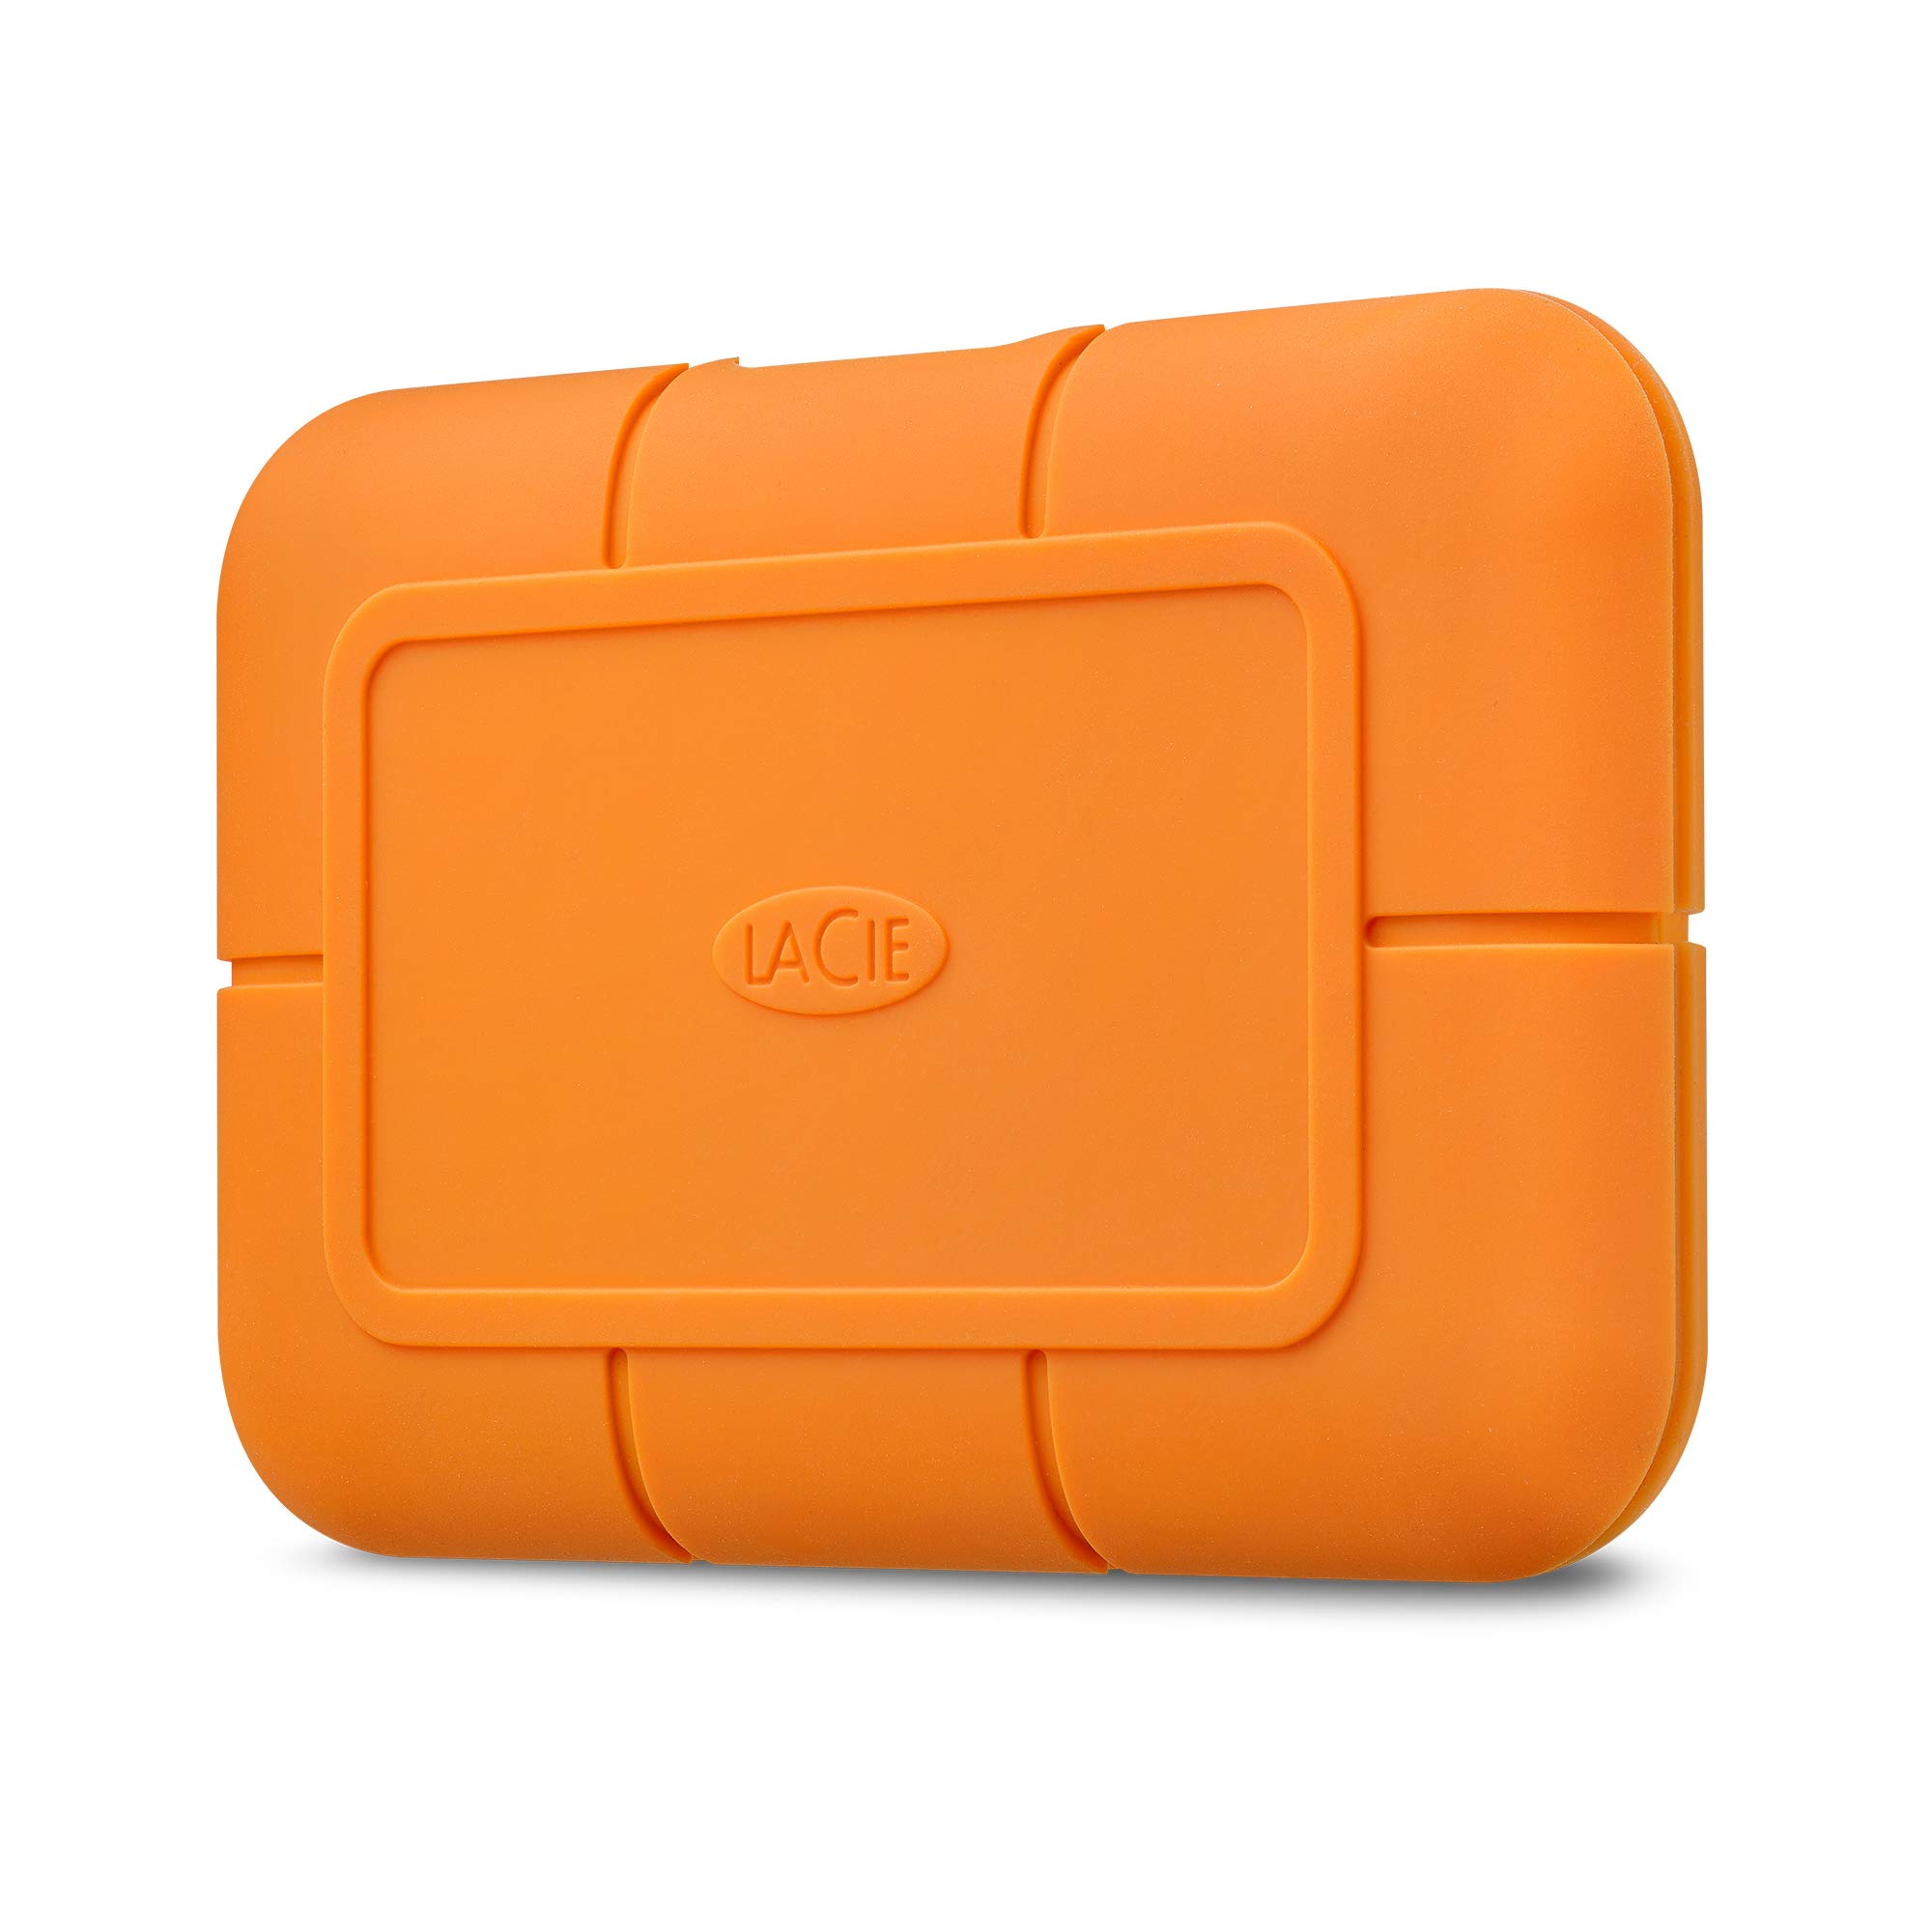 LaCie Rugged SSD 4TB Solid State Drive — USB-C USB 3.2 NVMe speeds up to 1050MB/s, IP67 Water Resistant, 3m Drop Resistant, Encryption, 5-Year Warranty with Data Recovery, 1 Mo Adobe CC (STHR4000800)